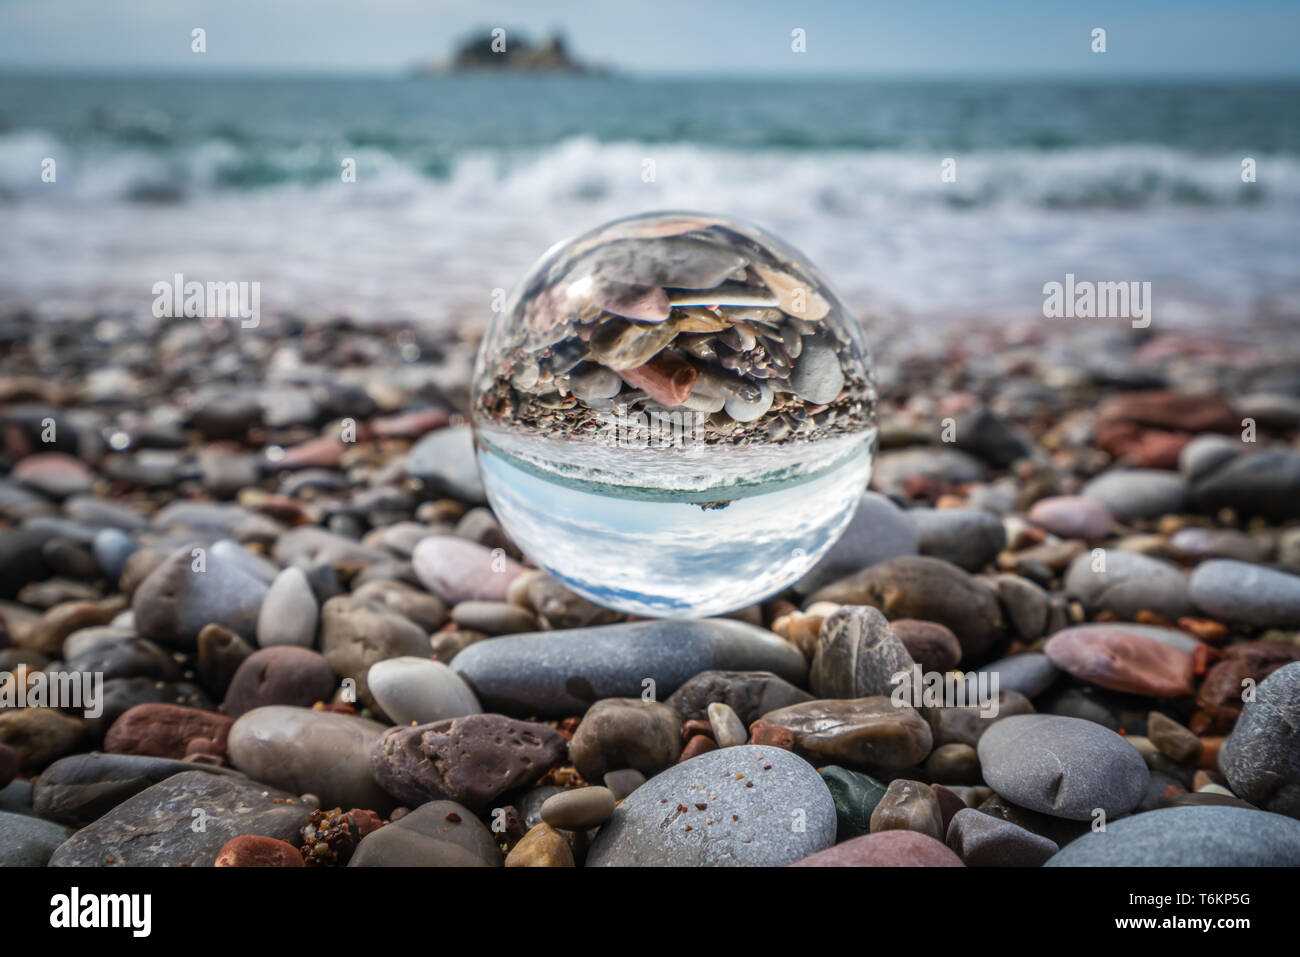 Beach peebles reflected in a galss ball Stock Photo